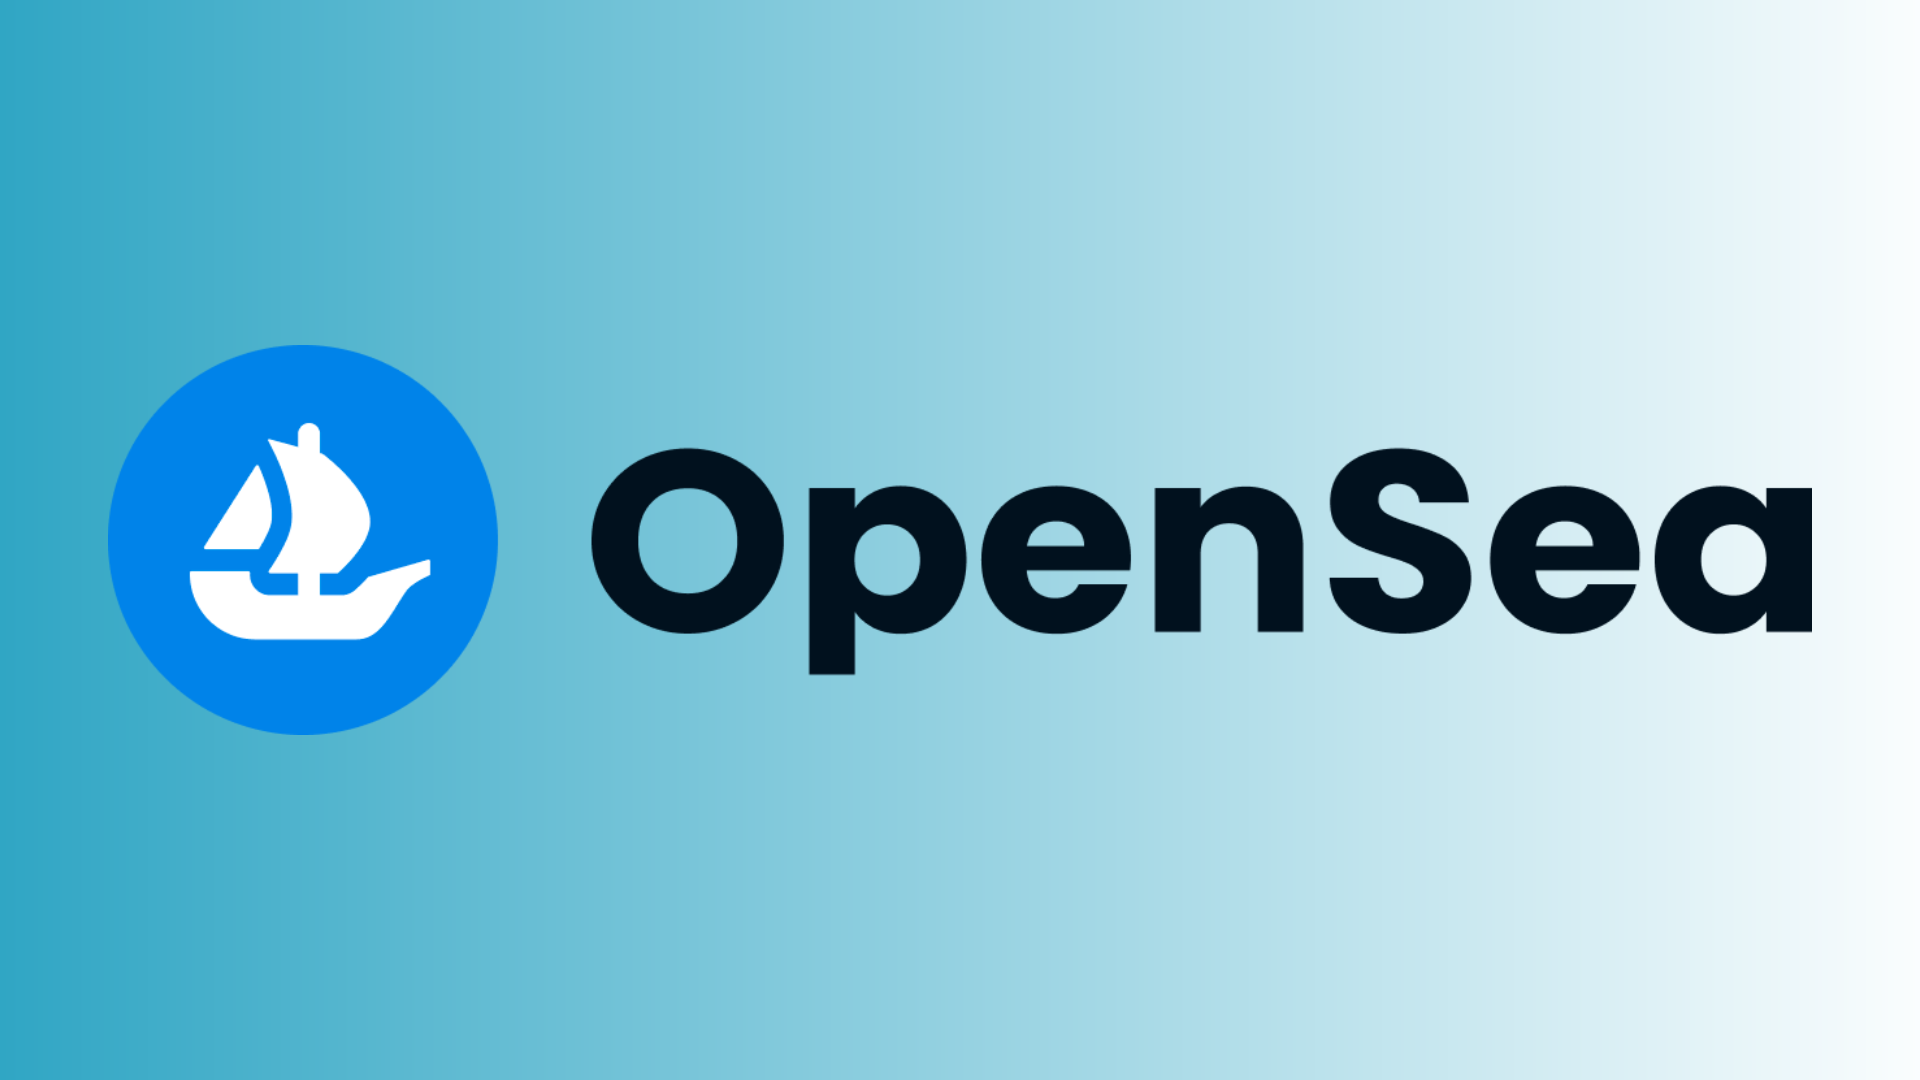 Here's How Web3 is Reacting to OpenSea's New 'Deals' Feature